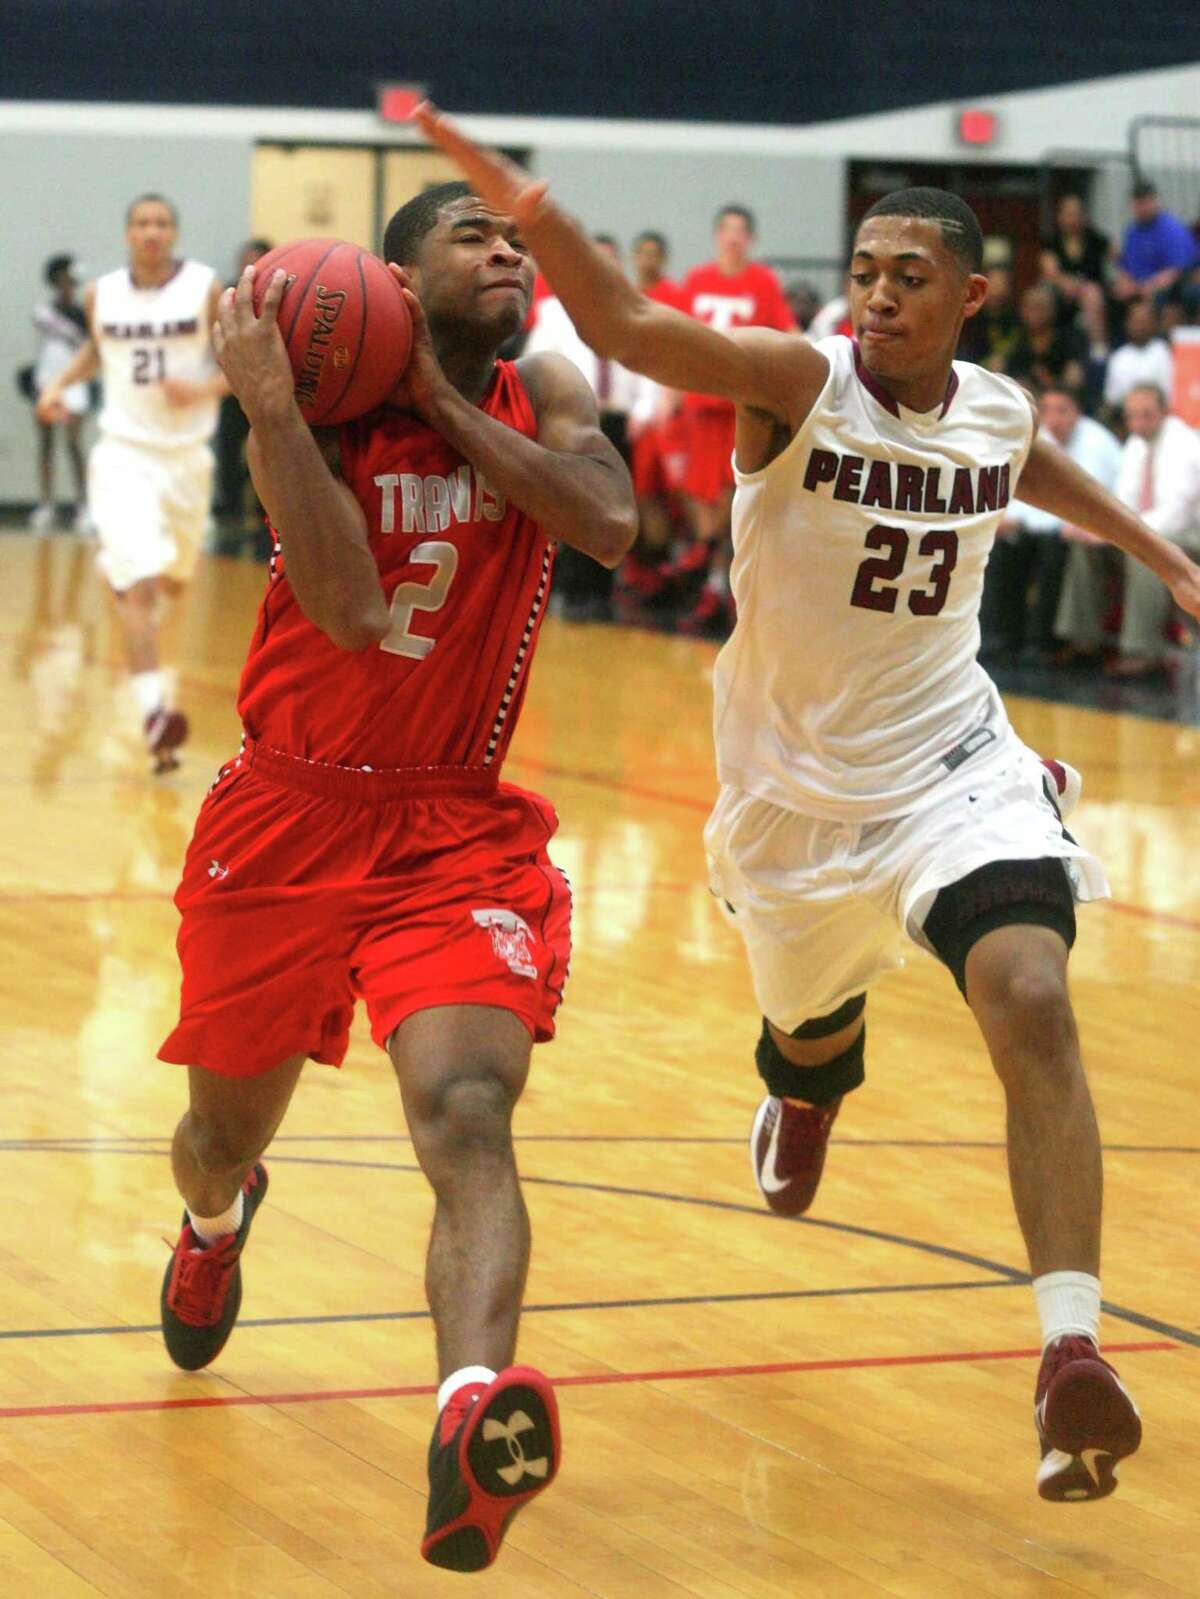 Pearland's Cameron Reynolds, shown in a high school playoff game against Fort Bend Travis, has signed a 10-day contract with the Minnesota Timberwolves.